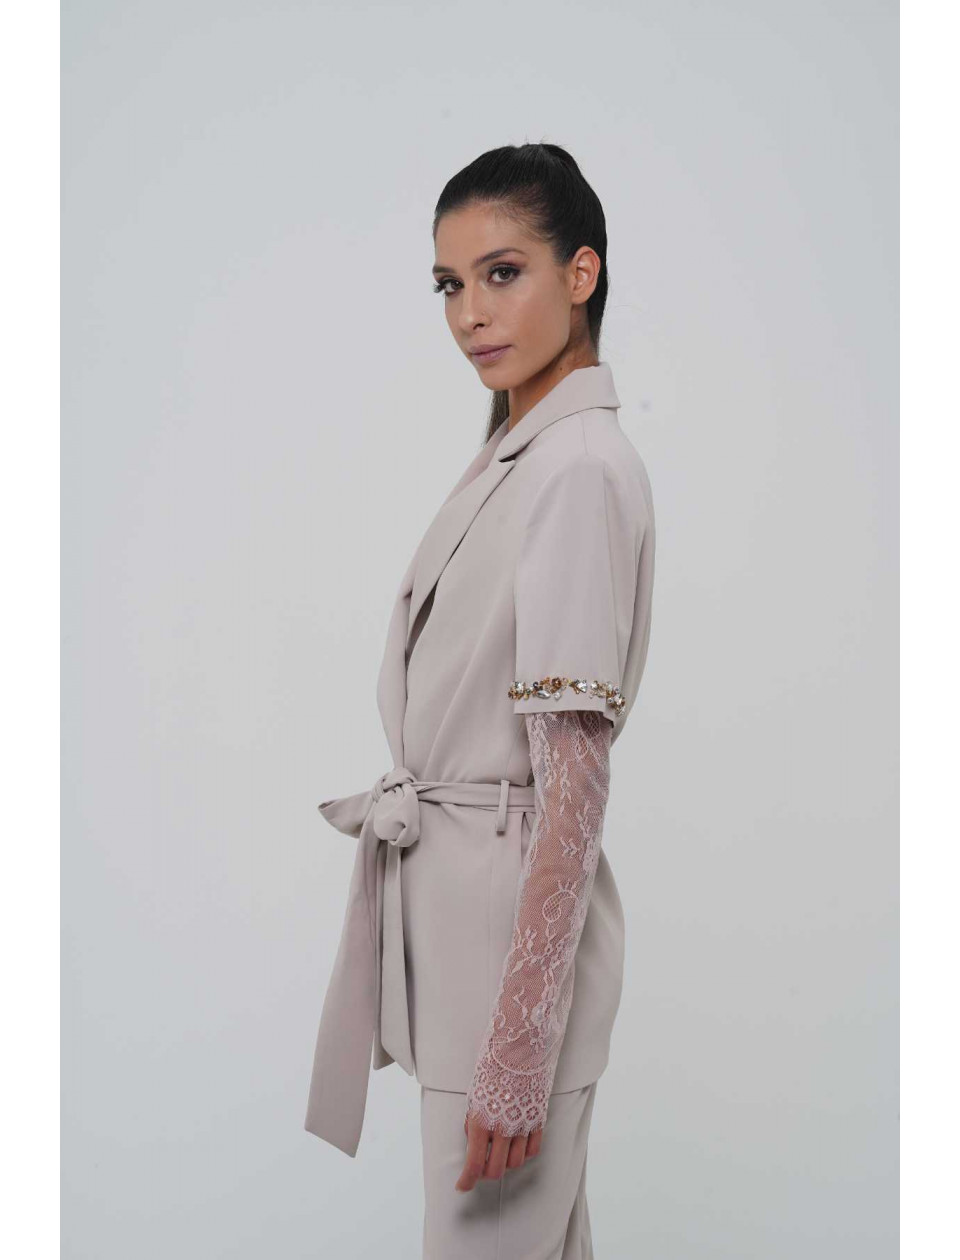 RUFFLED JACKET AND TROUSERS SET